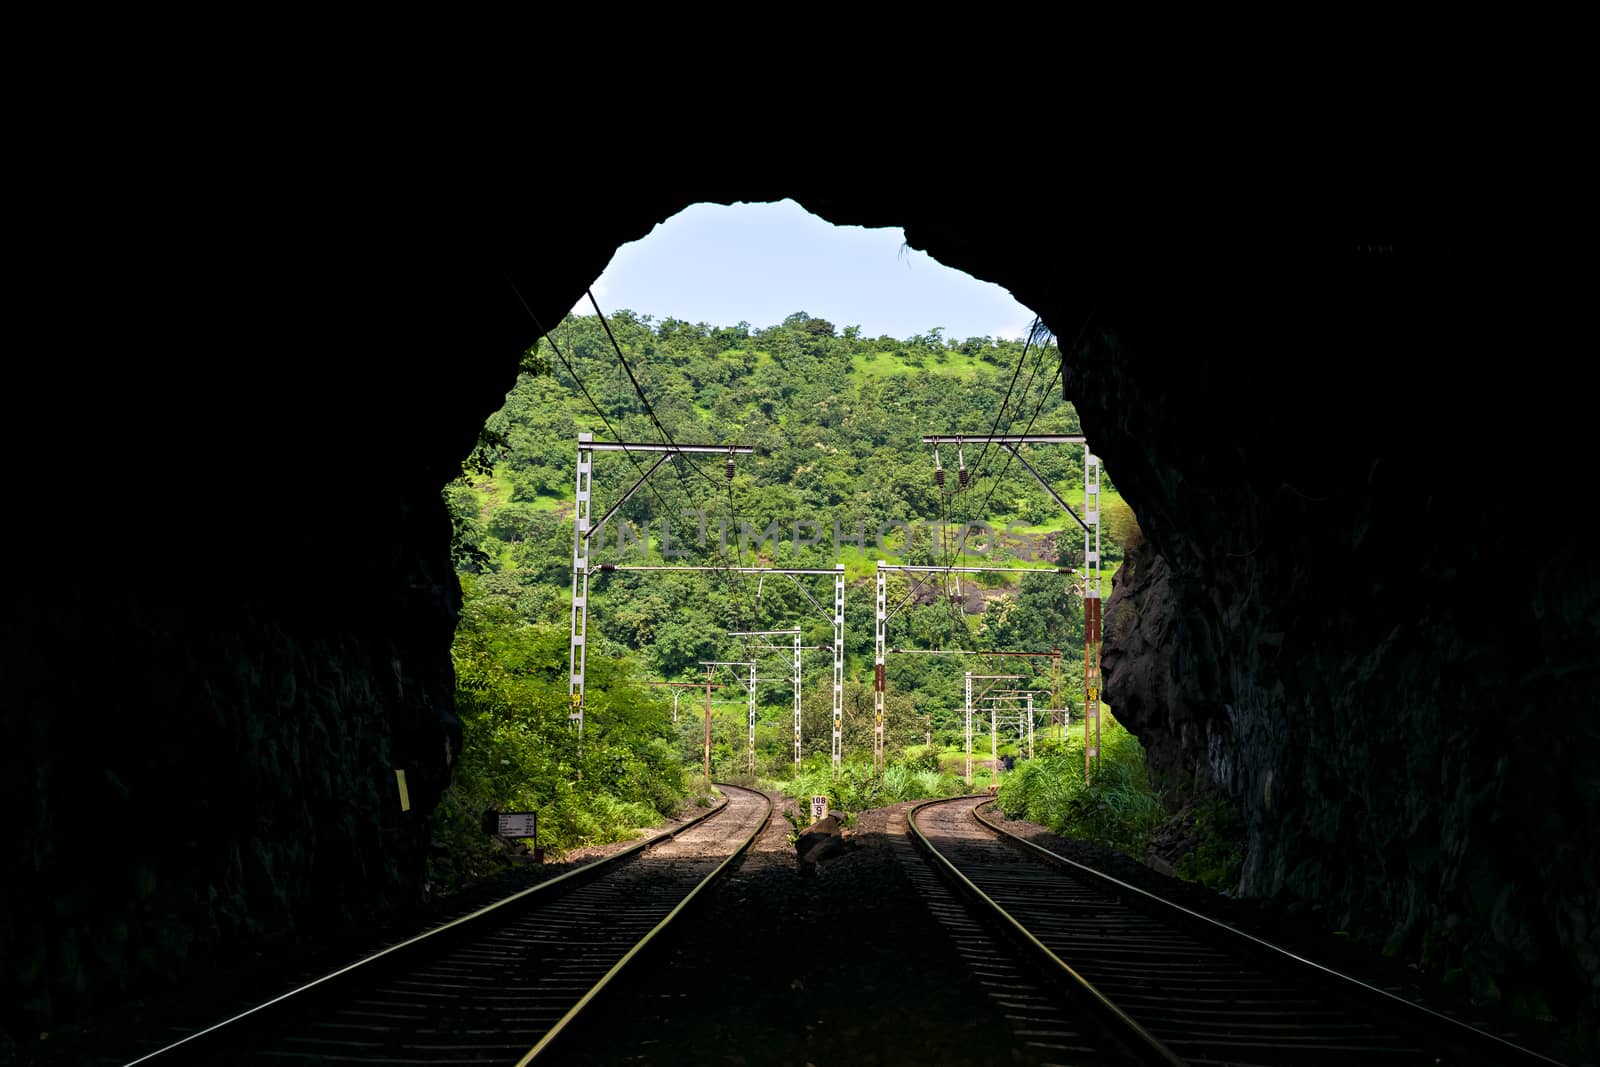 View through a railway tunnel with two diverging routes ahead. by lalam